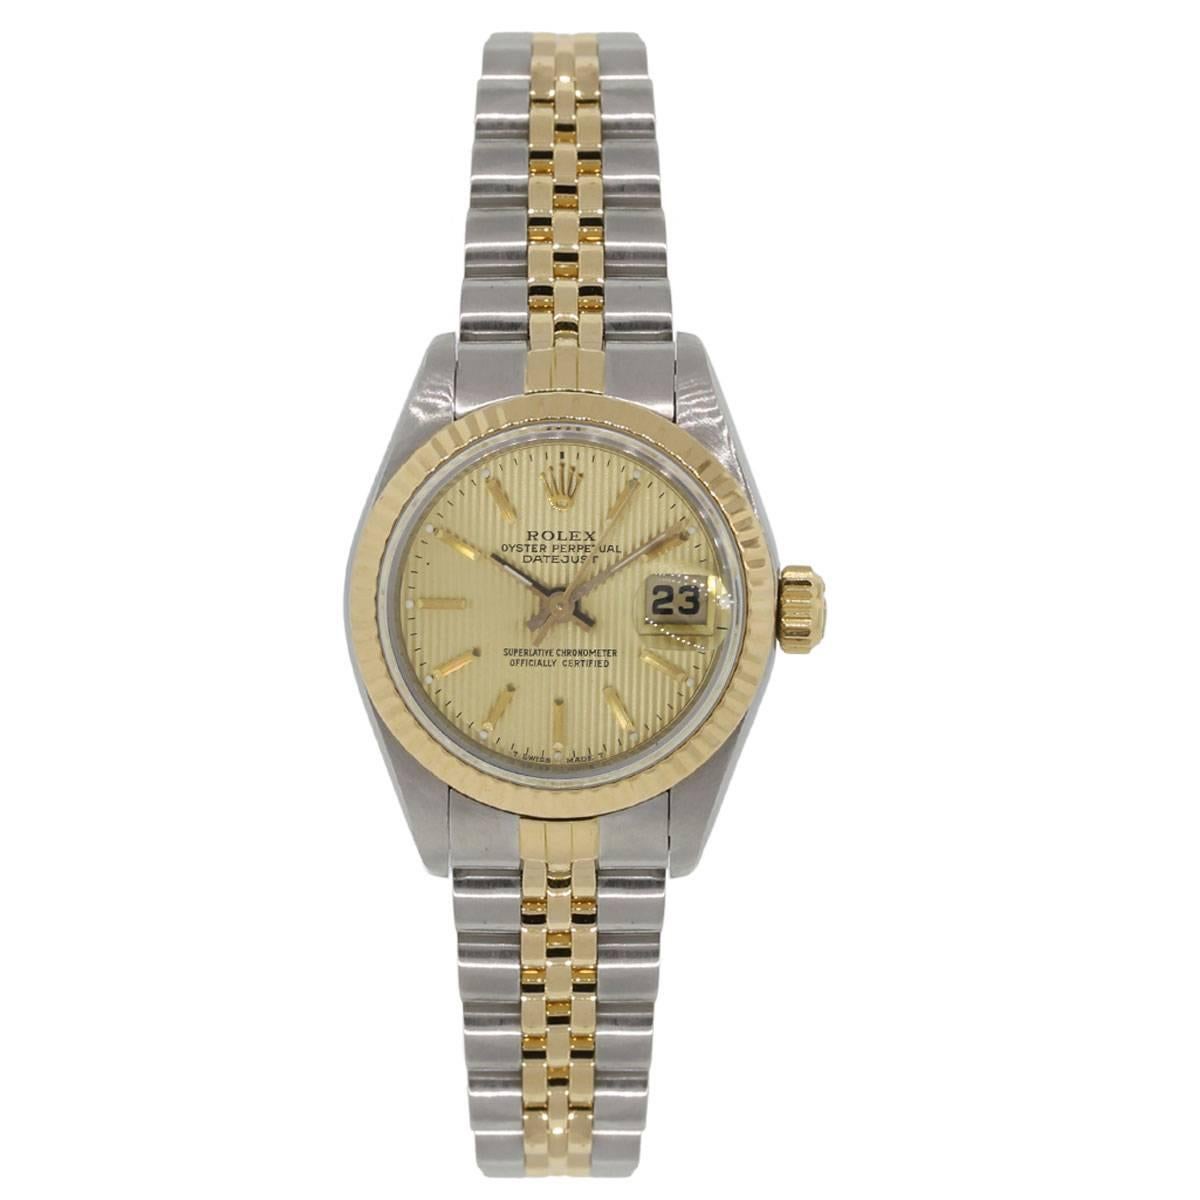 Brand: Rolex
MPN: 69173
Model: Datejust
Case Material: Stainless steel
Case Diameter: 26mm
Crystal: Scratch resistant sapphire
Bezel: 18k yellow gold fluted bezel
Dial: Tapestry champagne dial with gold hands and hour markers, date window at the 3